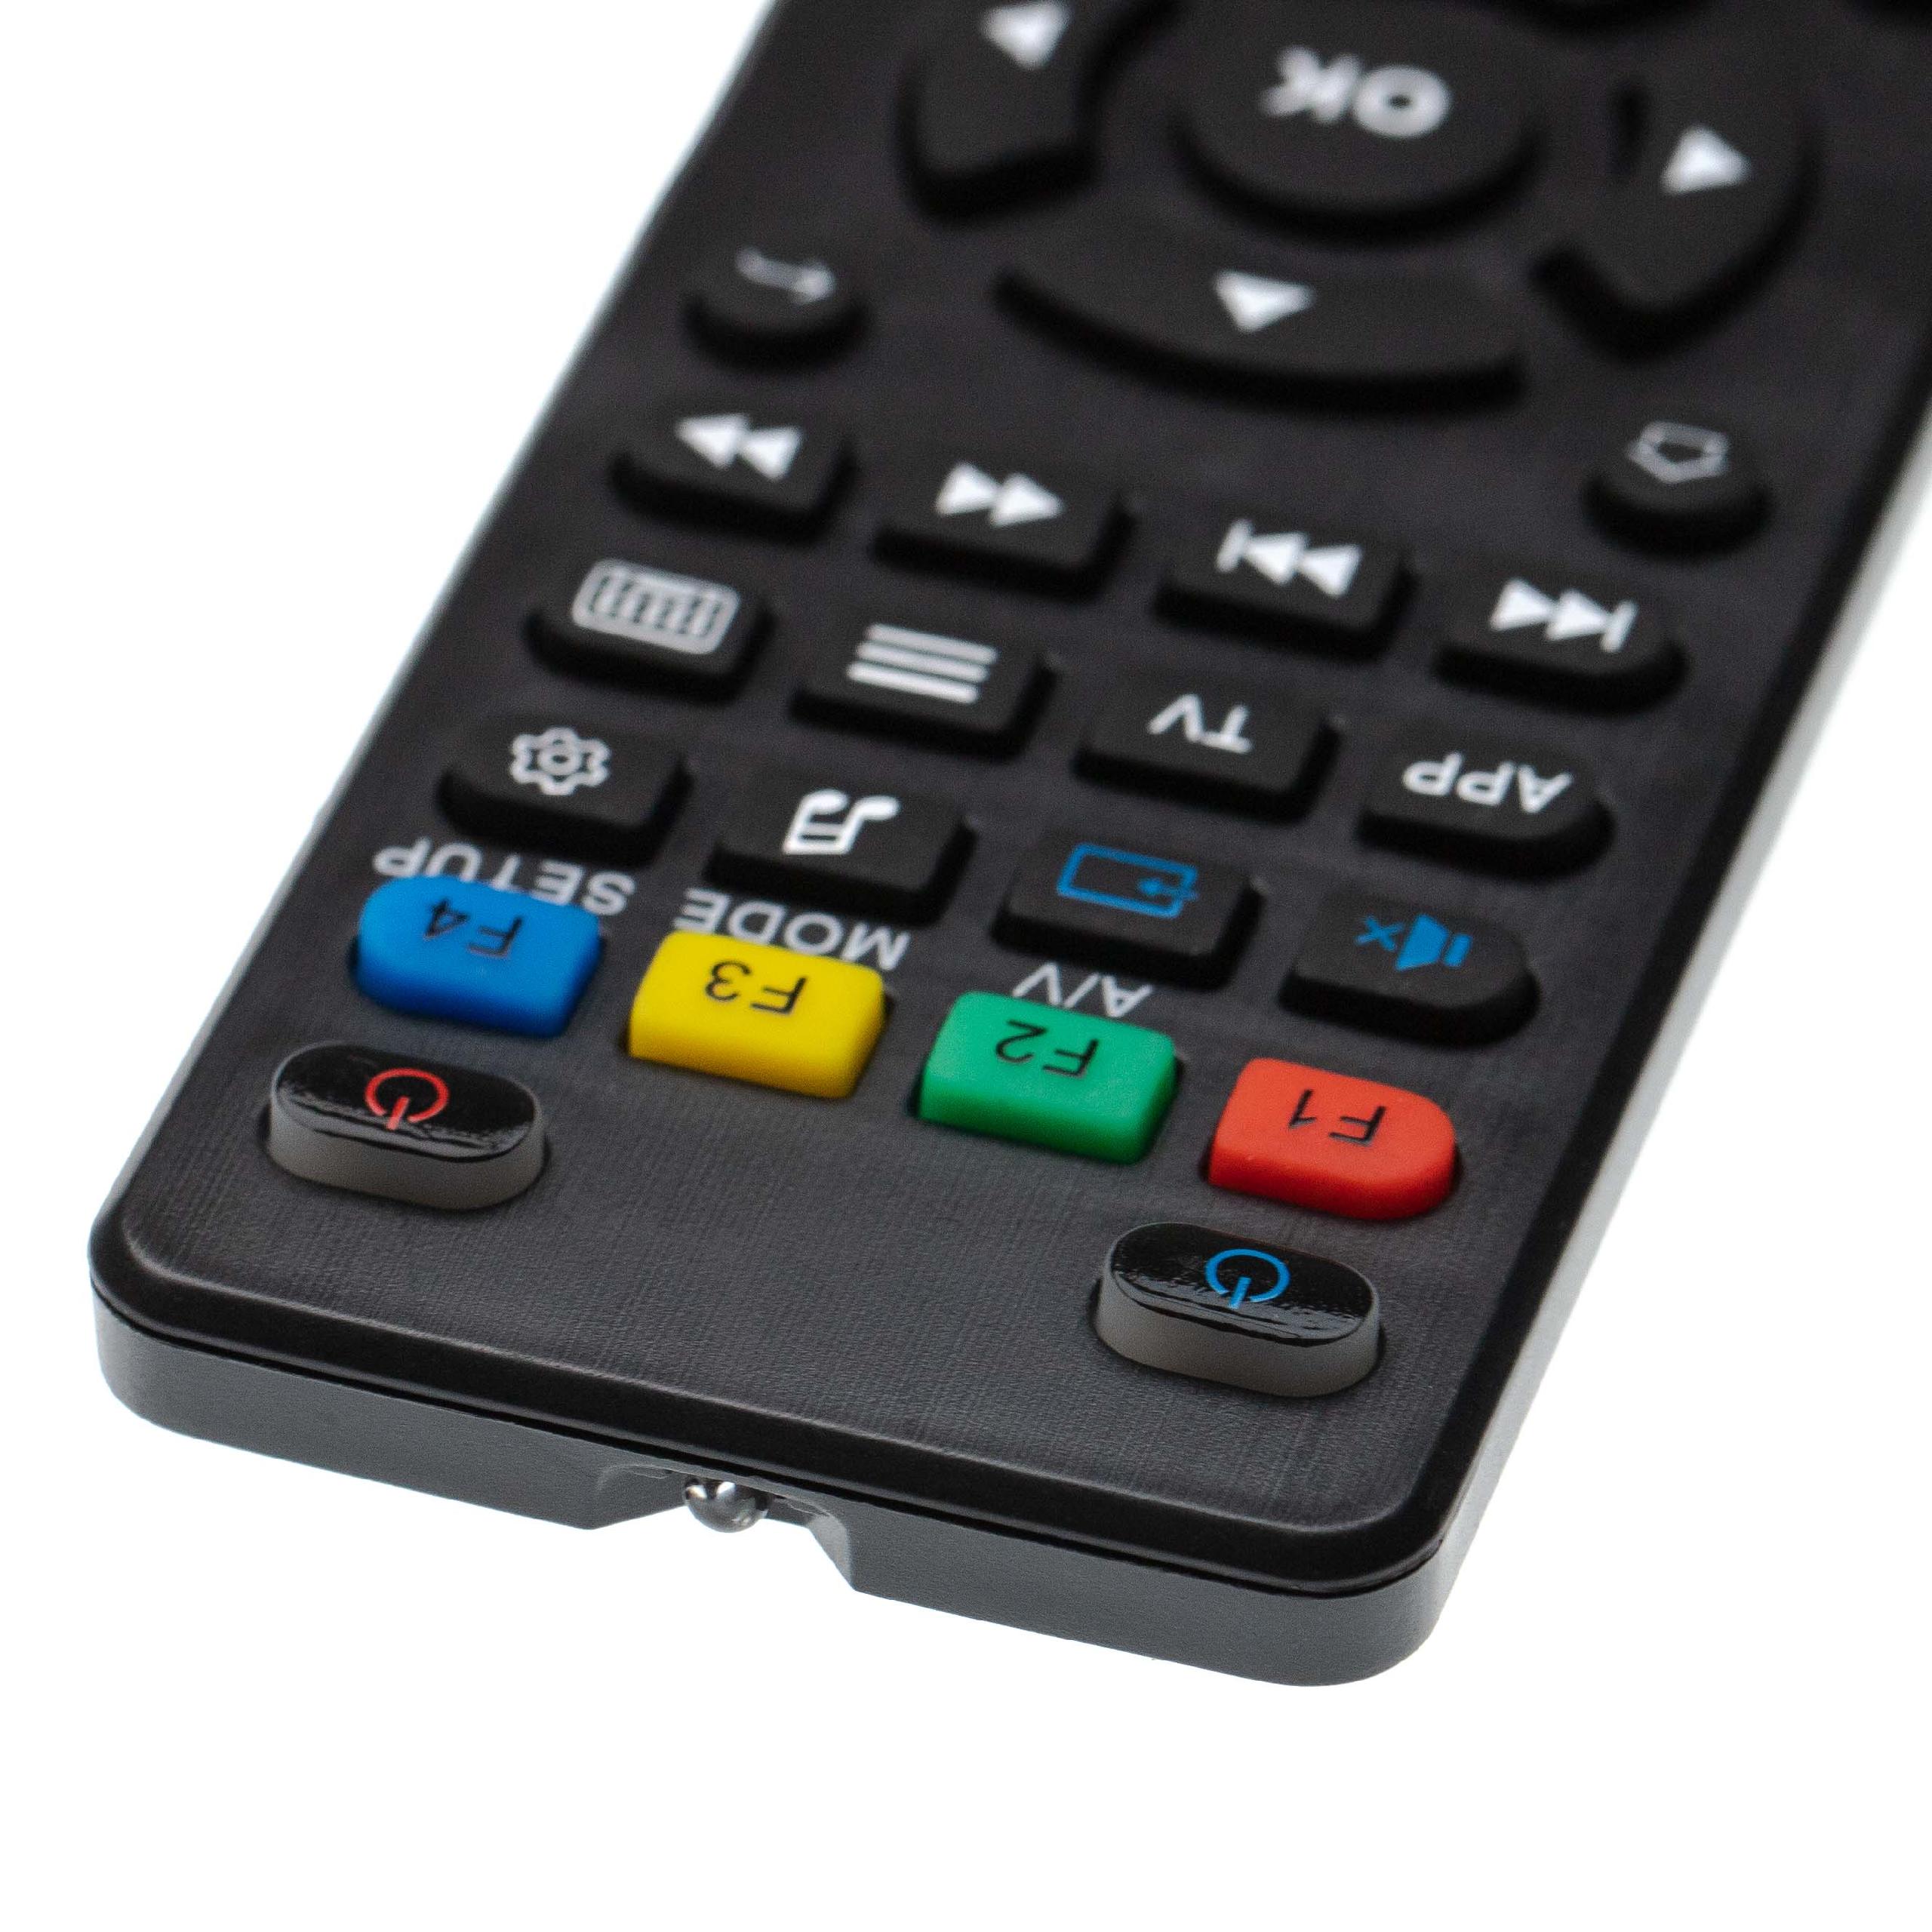 Remote Controlreplacement remote for tv, television